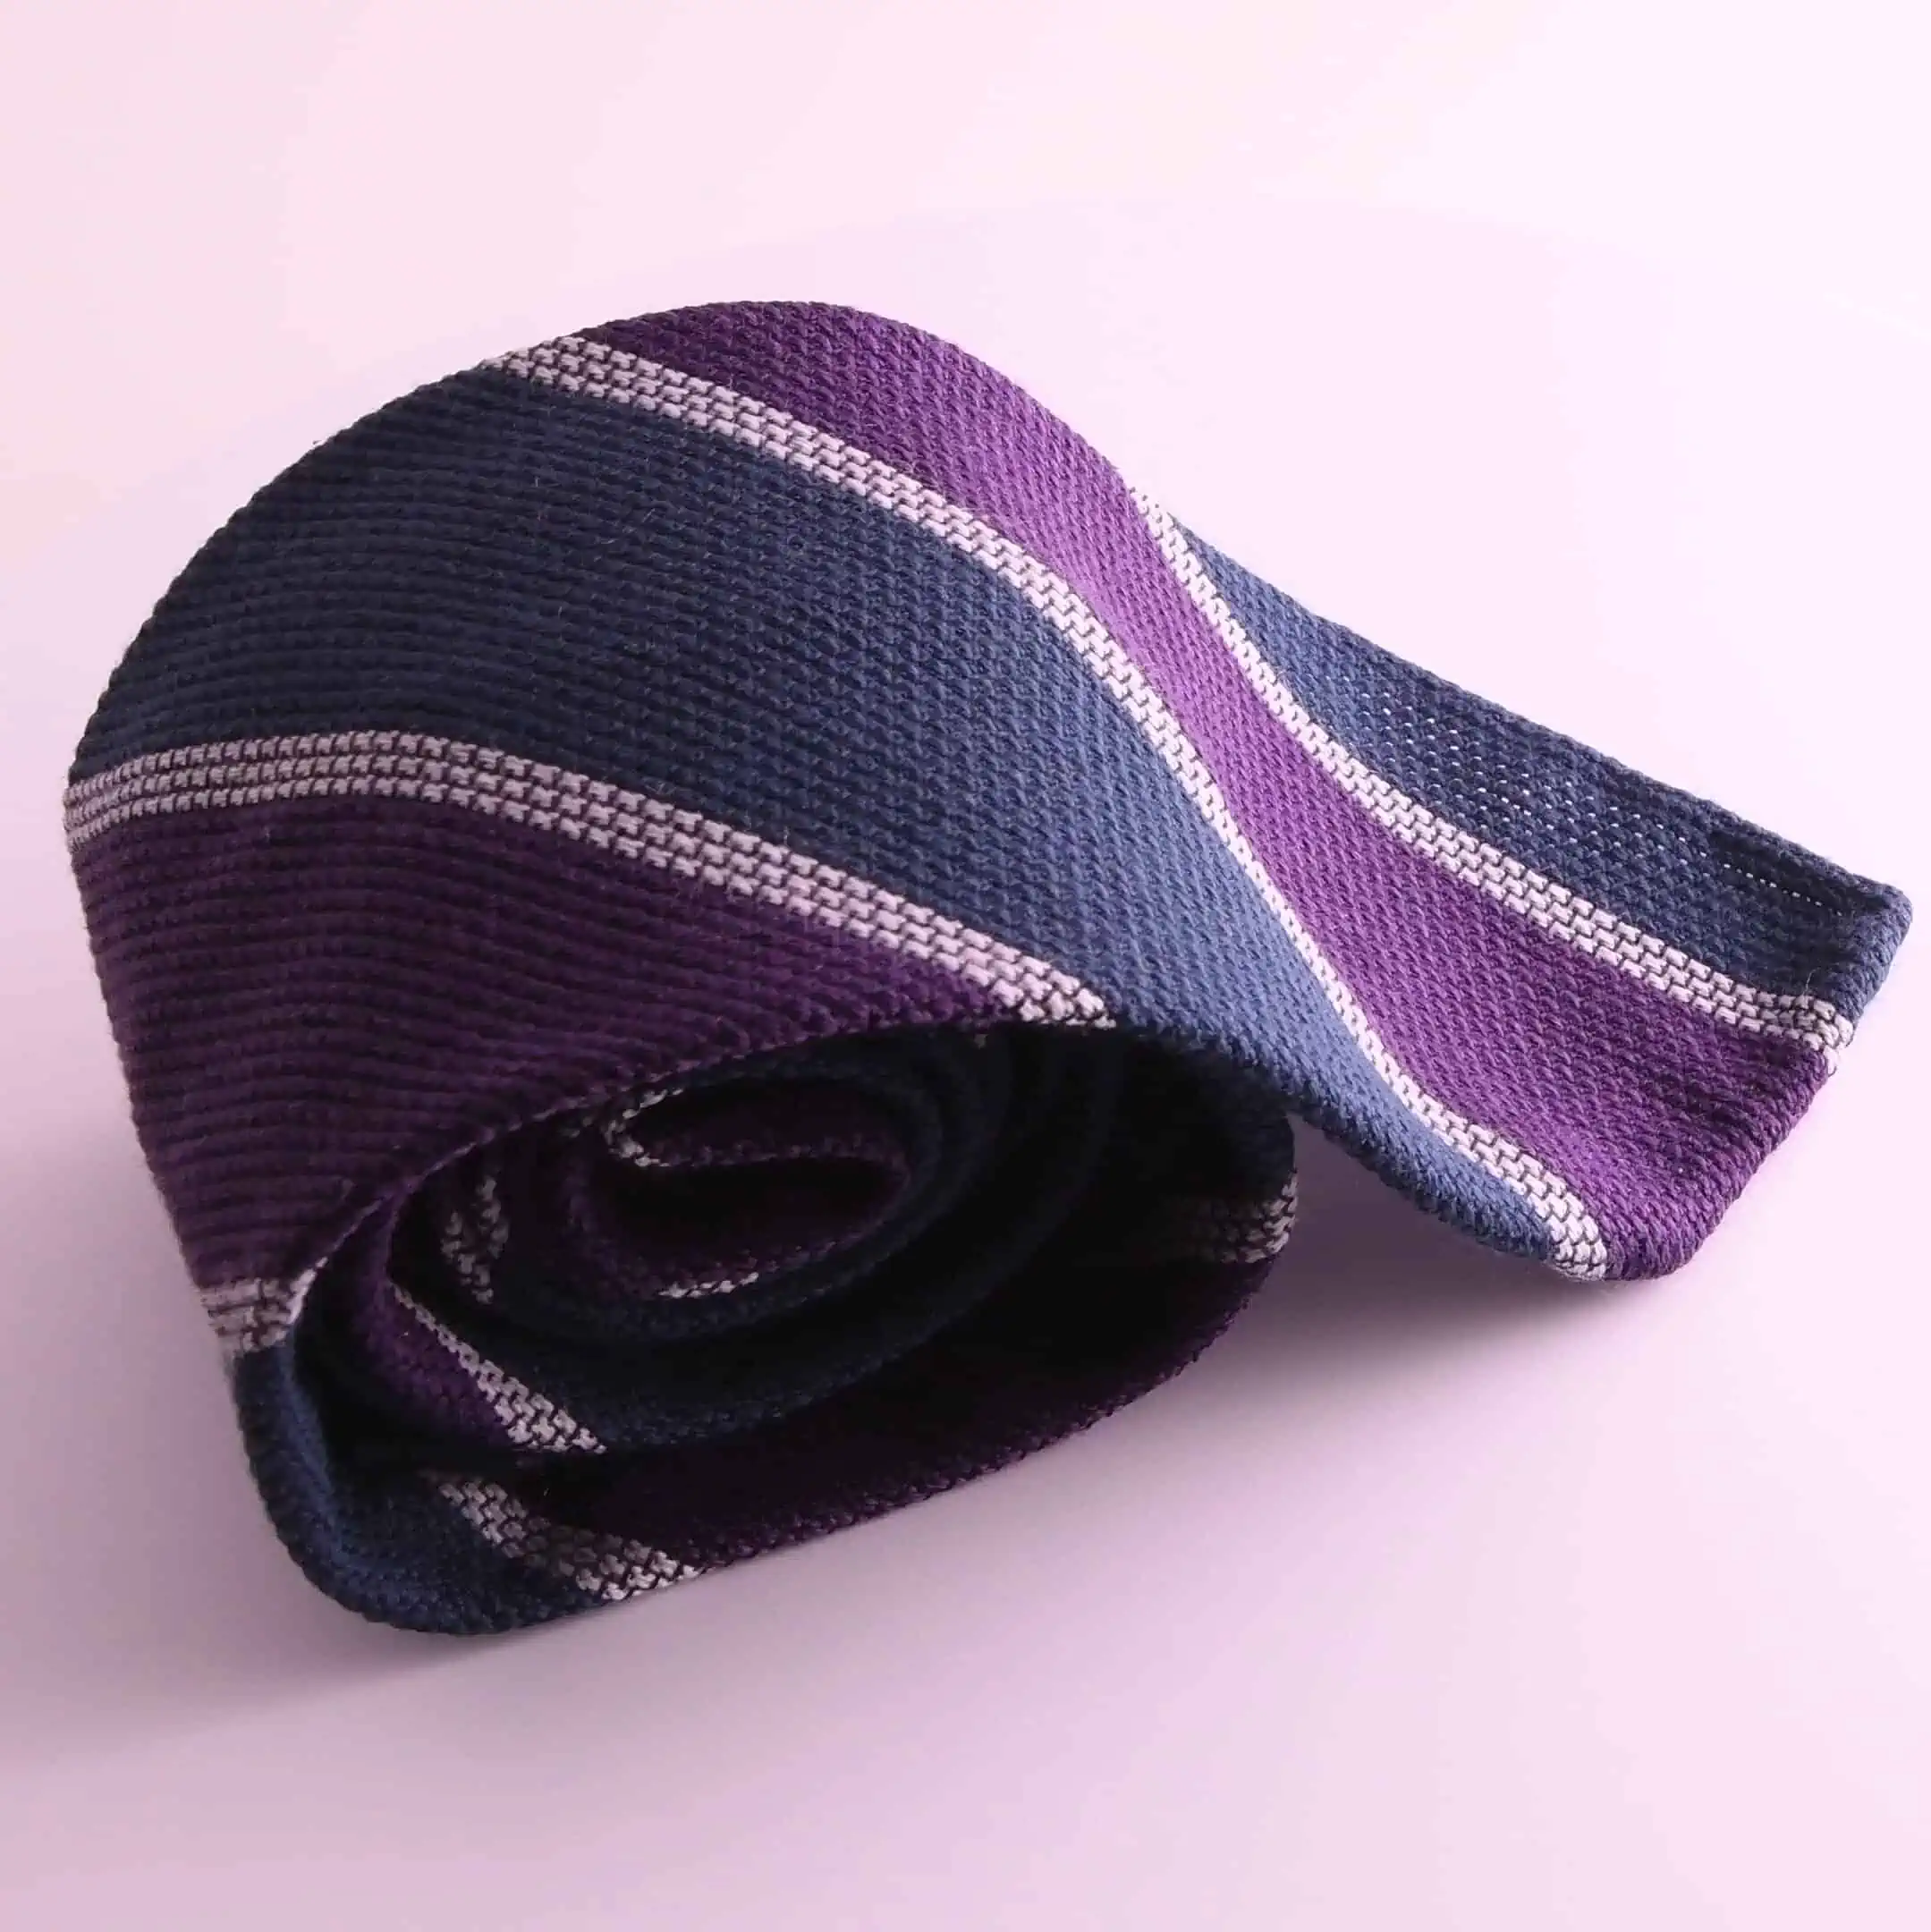 An exquisite classic piece of cashmere tie from Fort Belvedere.